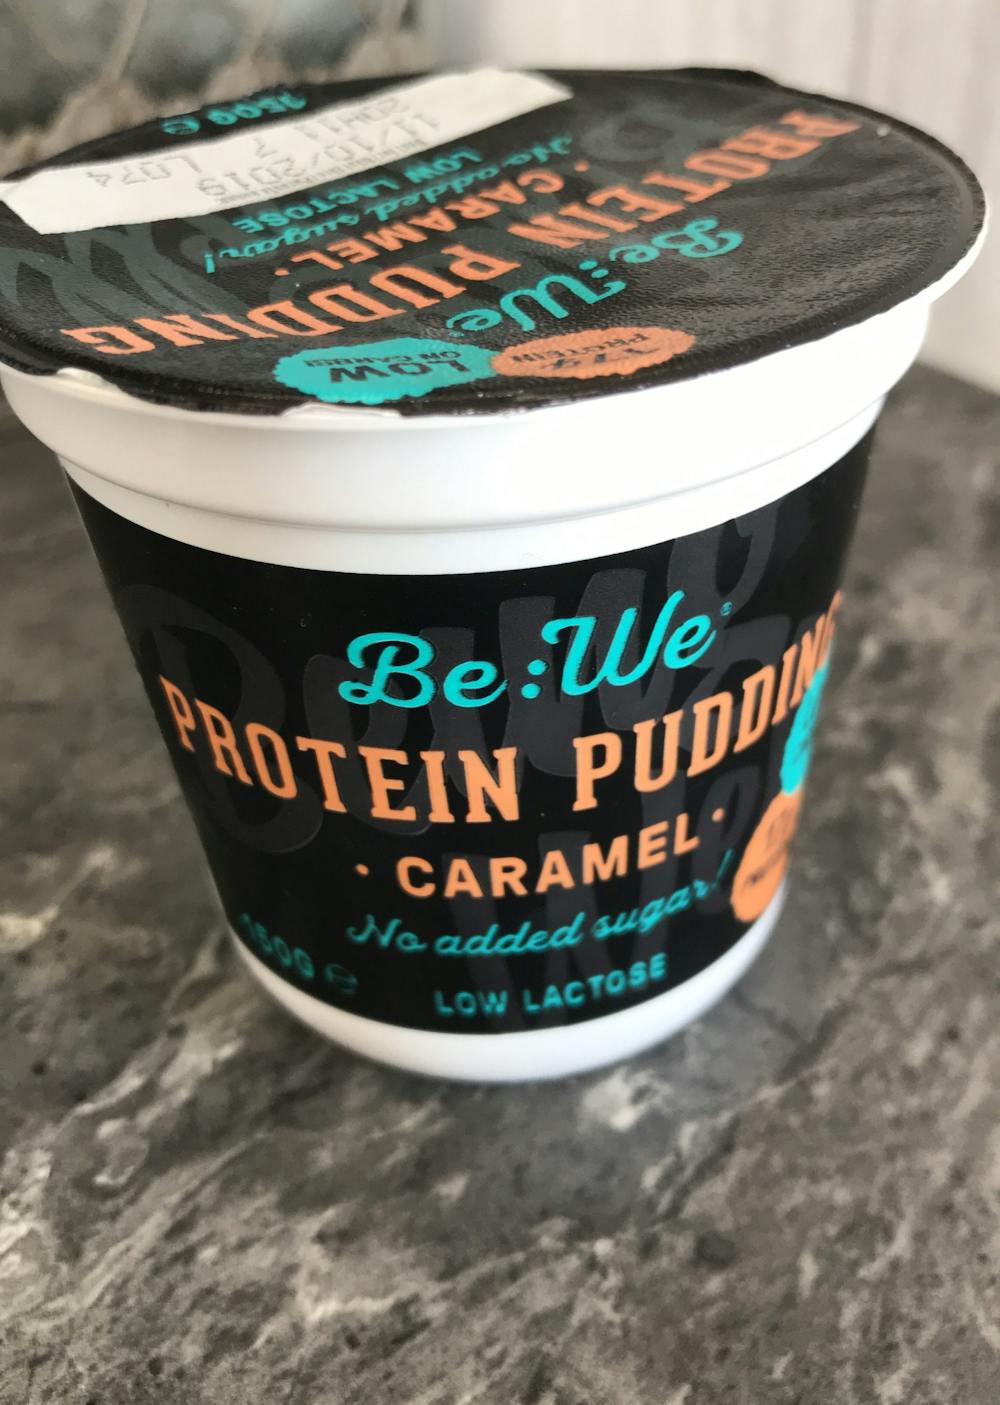 Protein pudding caramel, Be:We